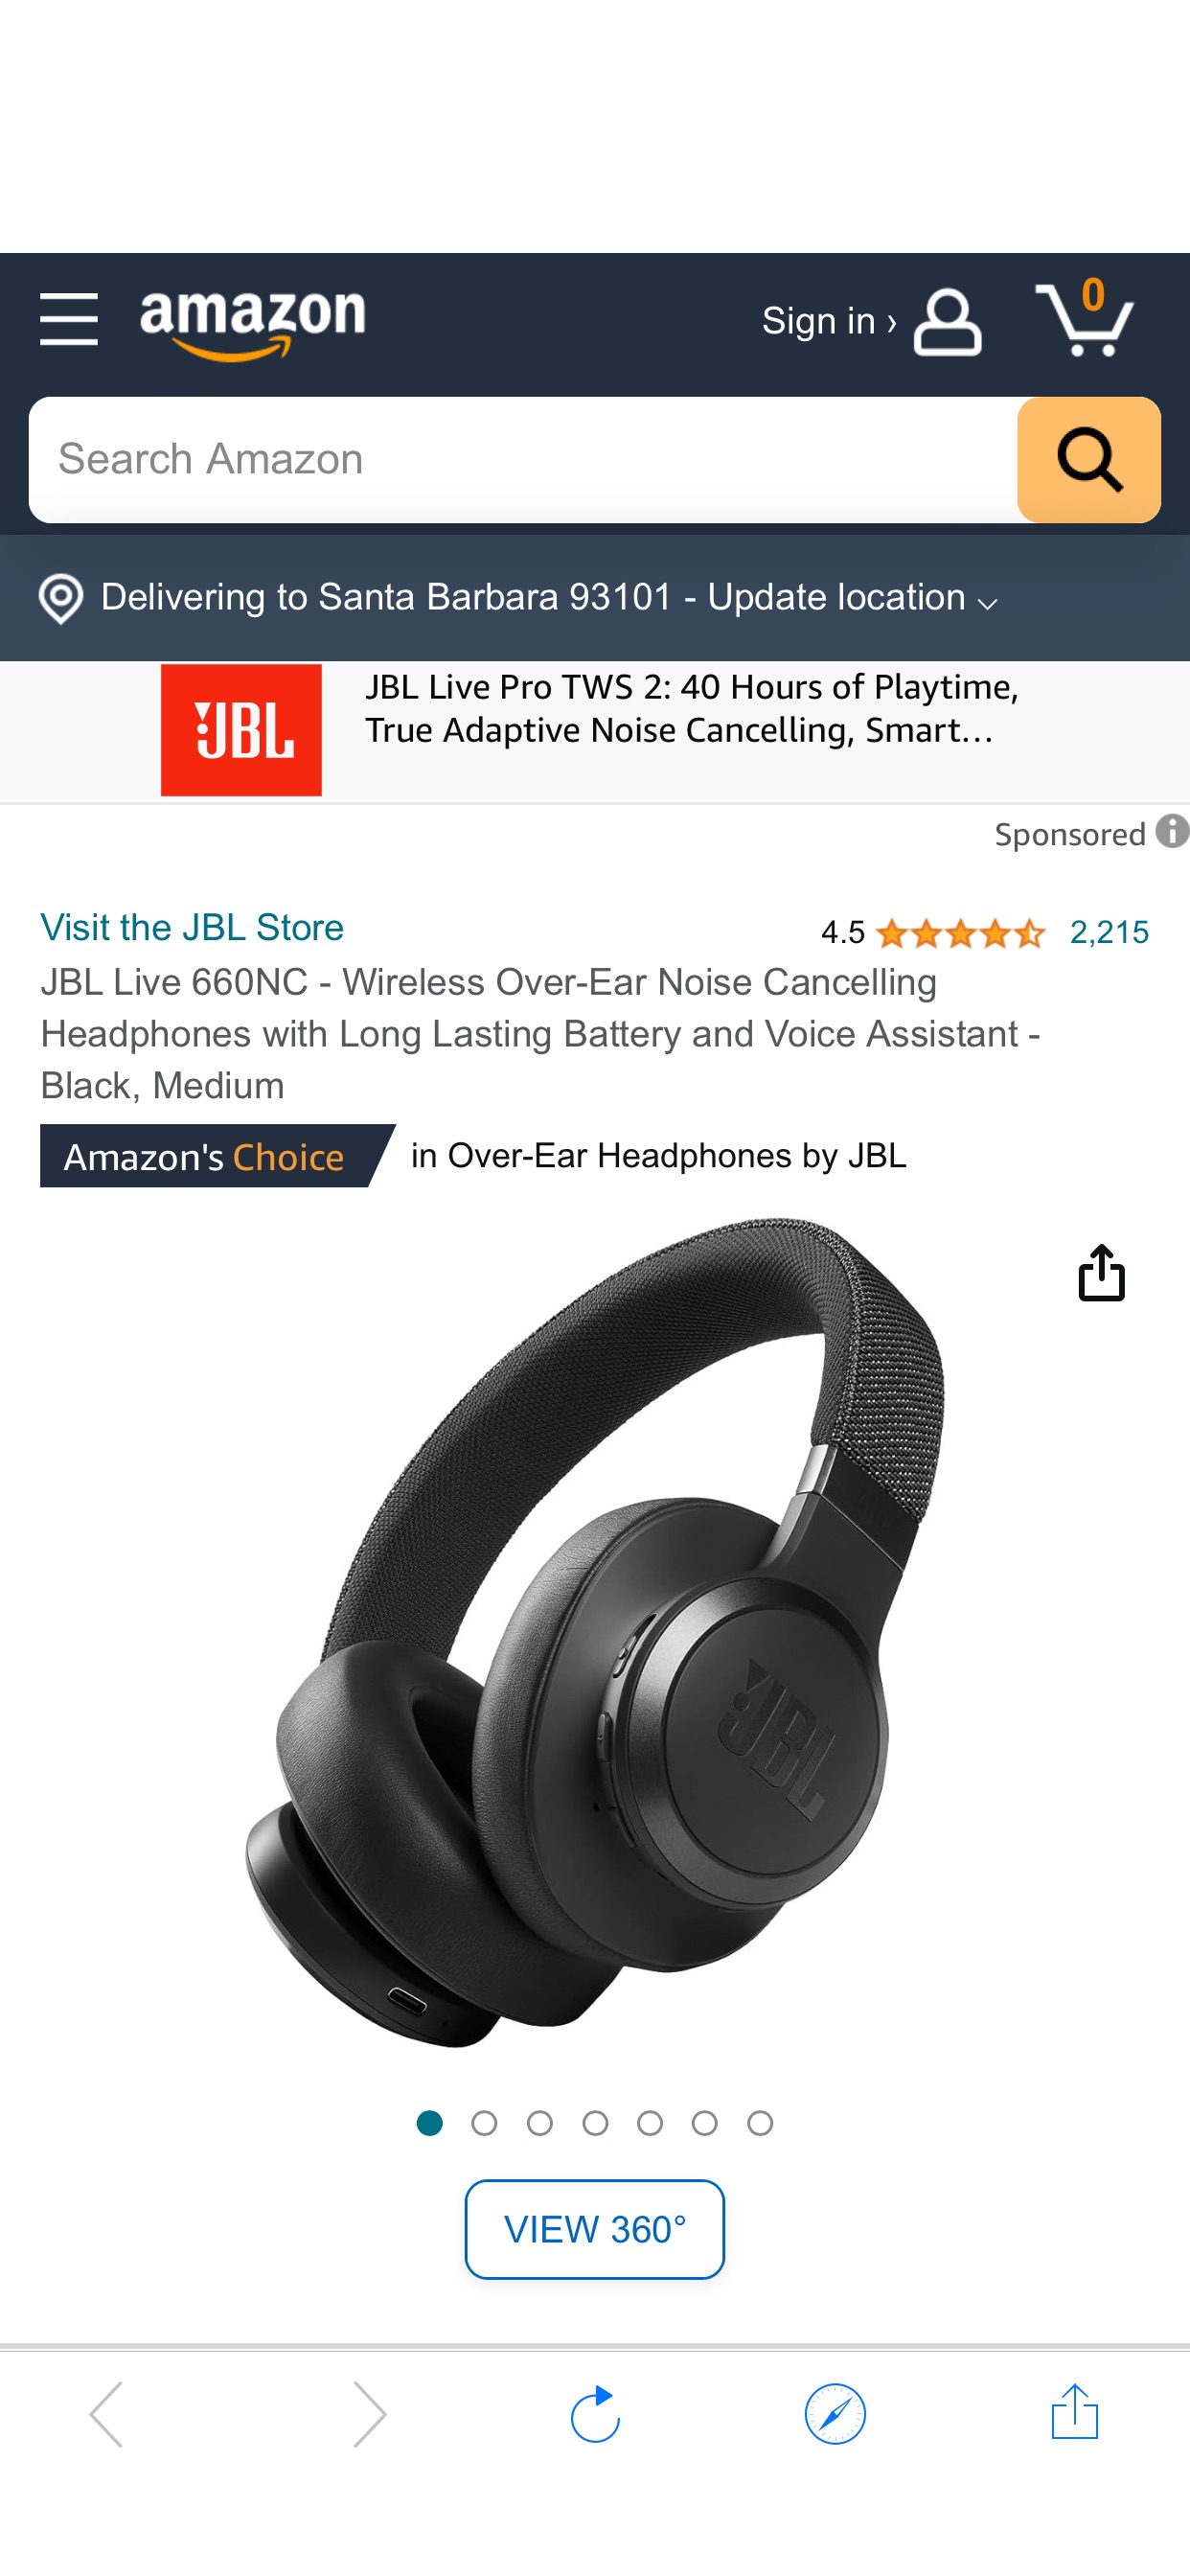 Amazon.com: JBL Live 660NC - Wireless Over-Ear Noise Cancelling Headphones with Long Lasting Battery and Voice Assistant - Black, Medium : Electronics